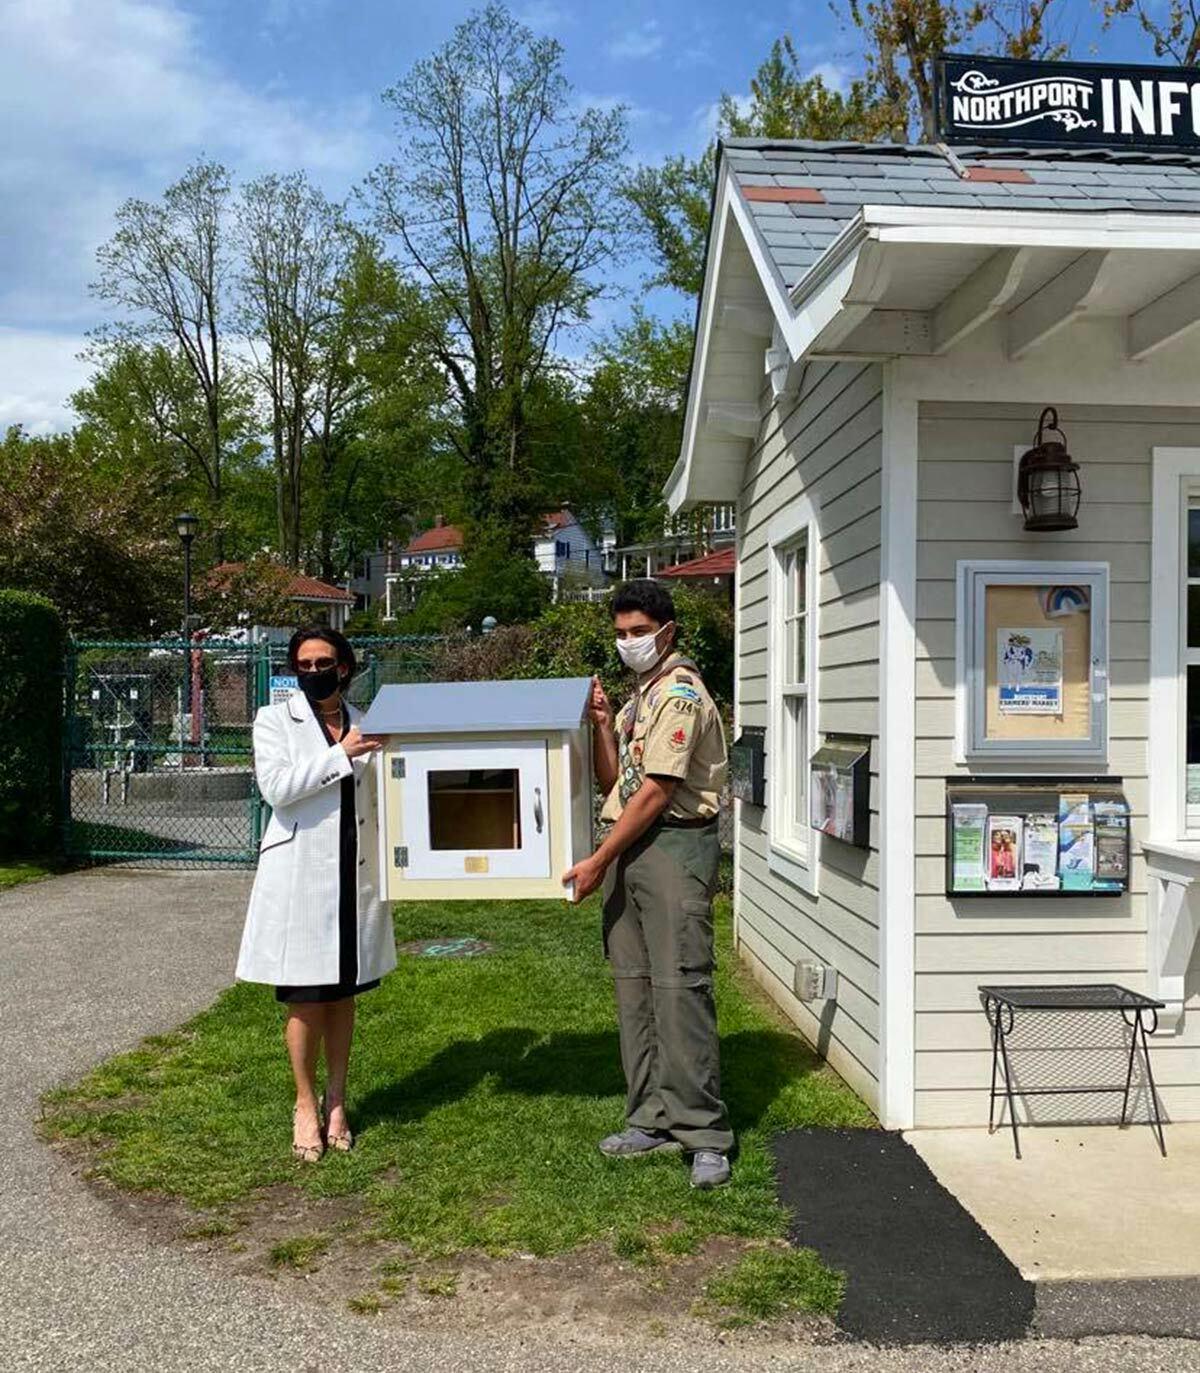 Michael Monda with Village Trustee Mercy Smith at the presentation of the lending library in Northport Village Park. Photo courtesy of Maria Monda.